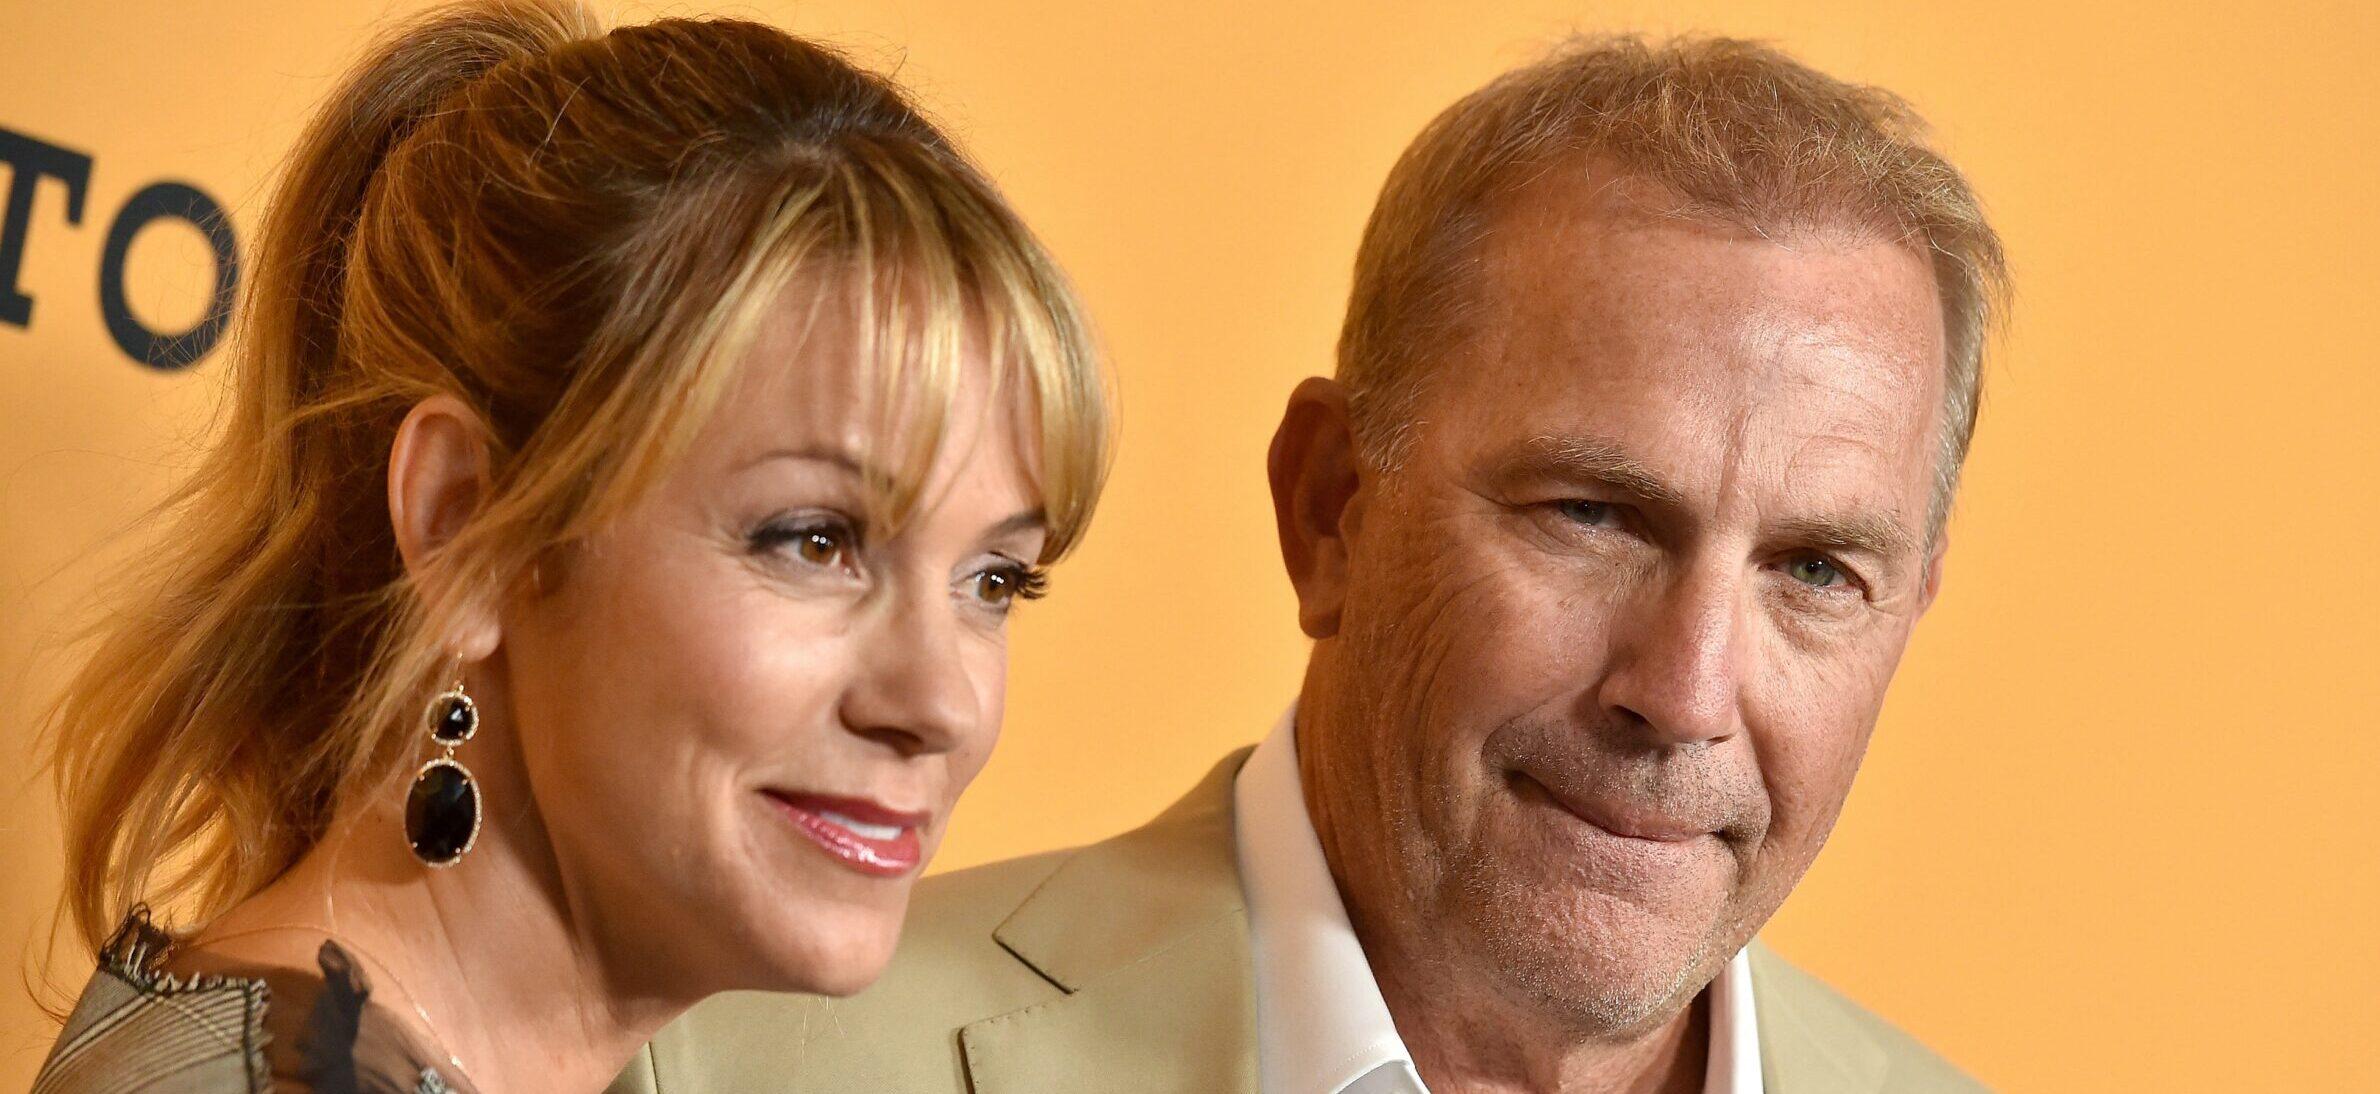 Kevin Costner’s Estranged Wife Reportedly Taking Break From Divorce Drama With 2 Of Their Kids